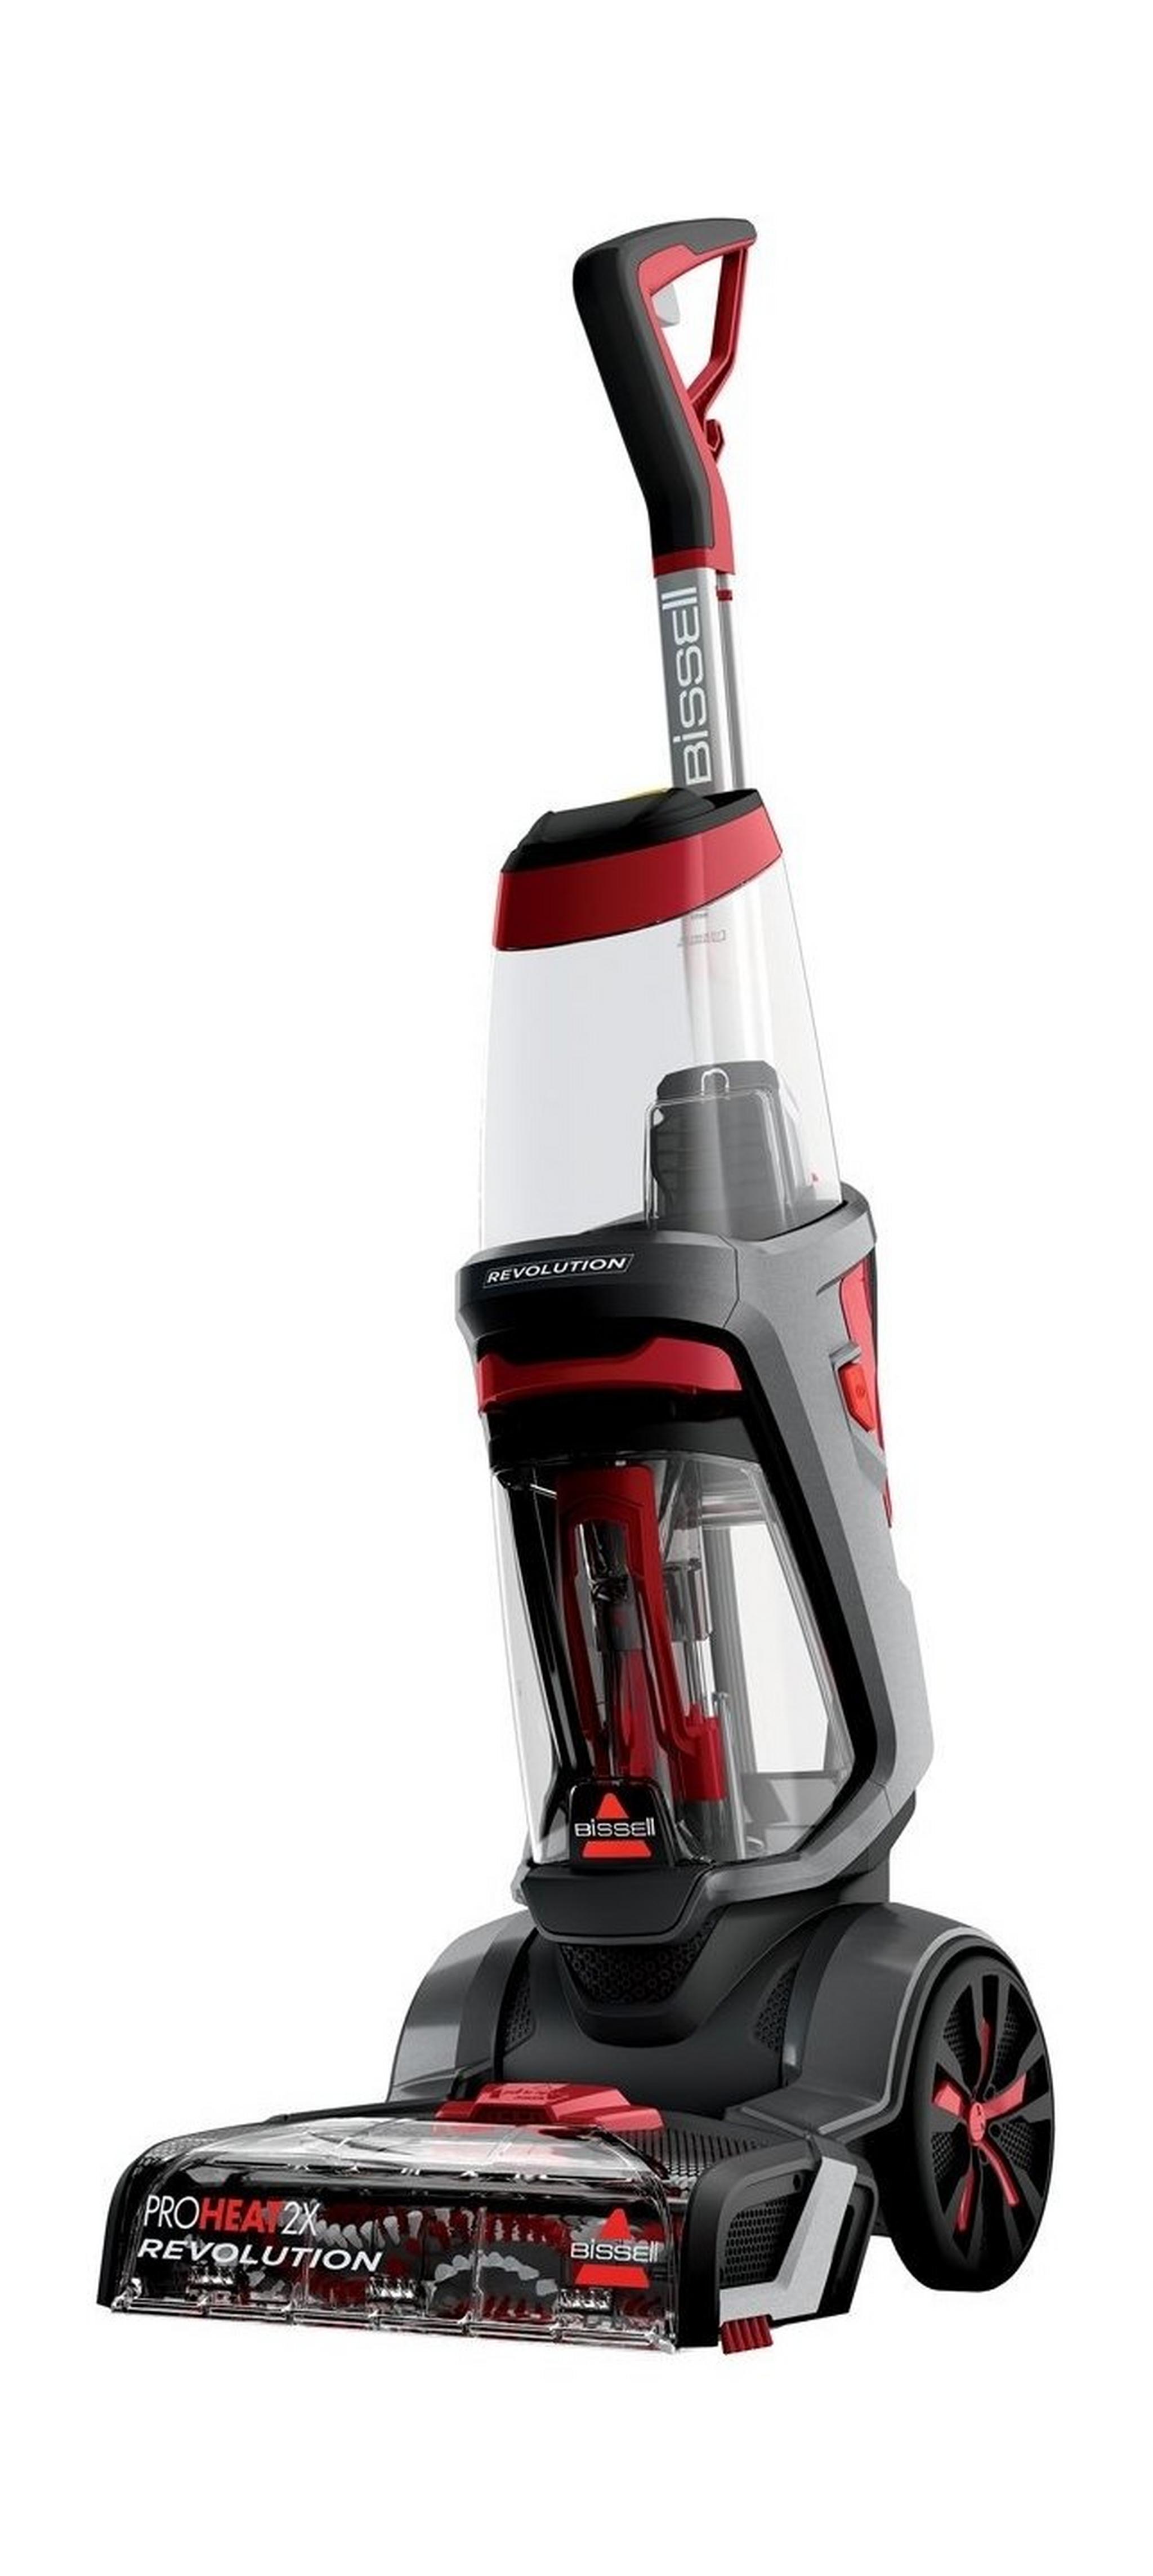 Bissell ProHeat 2X Revolution Carpet Cleaner, 3.7 Litre, 1858E - Black / Red